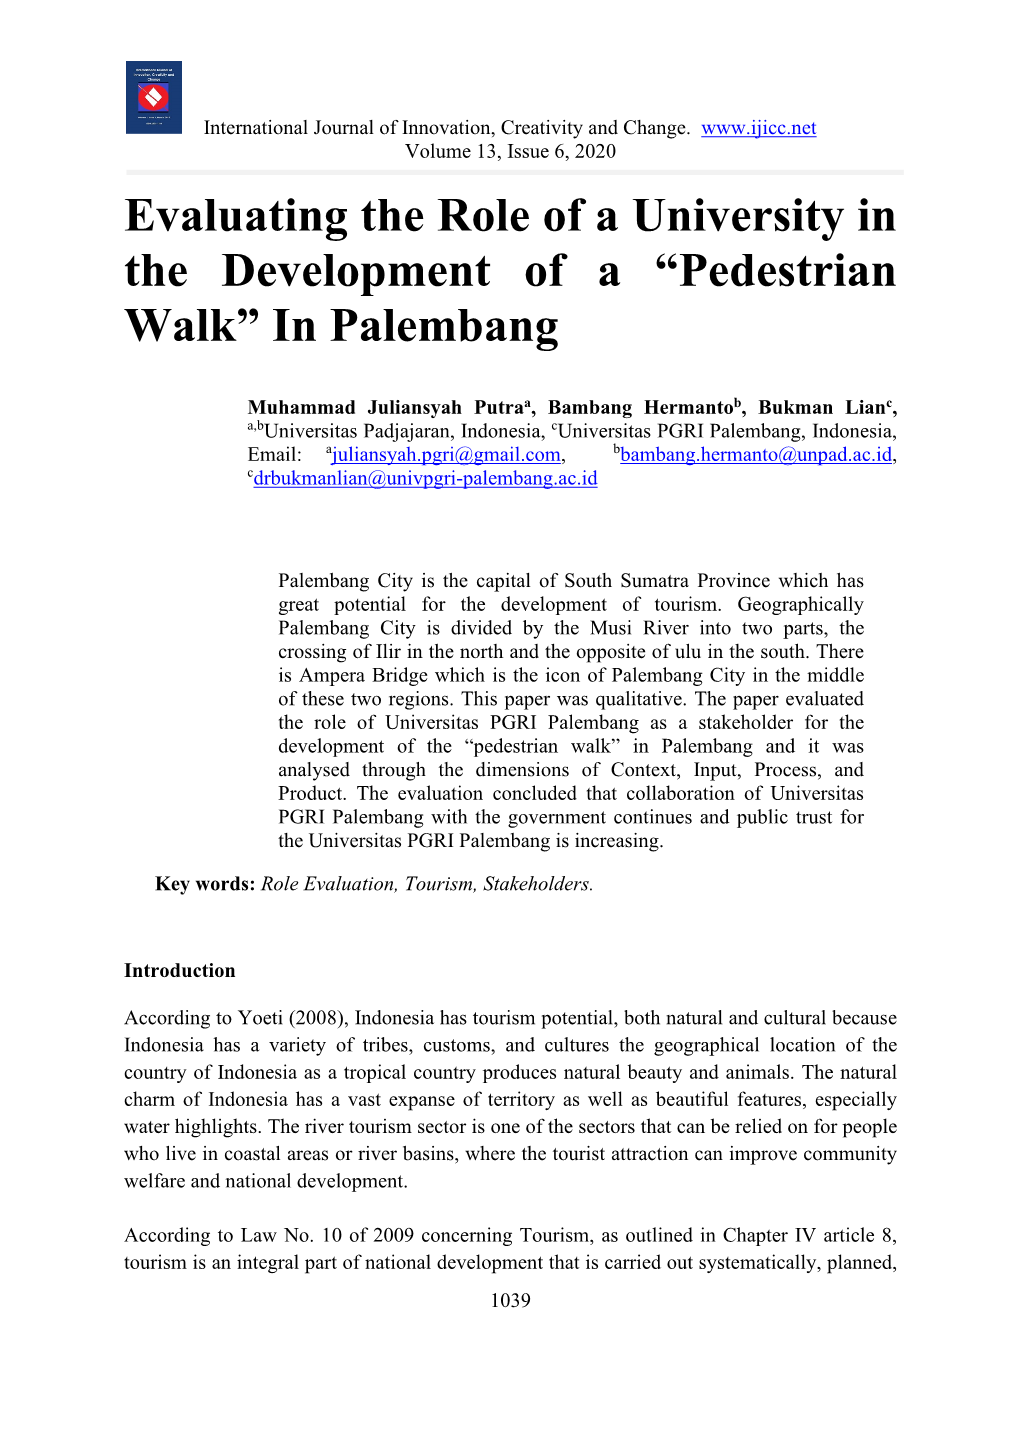 Evaluating the Role of a University in the Development of a “Pedestrian Walk” in Palembang